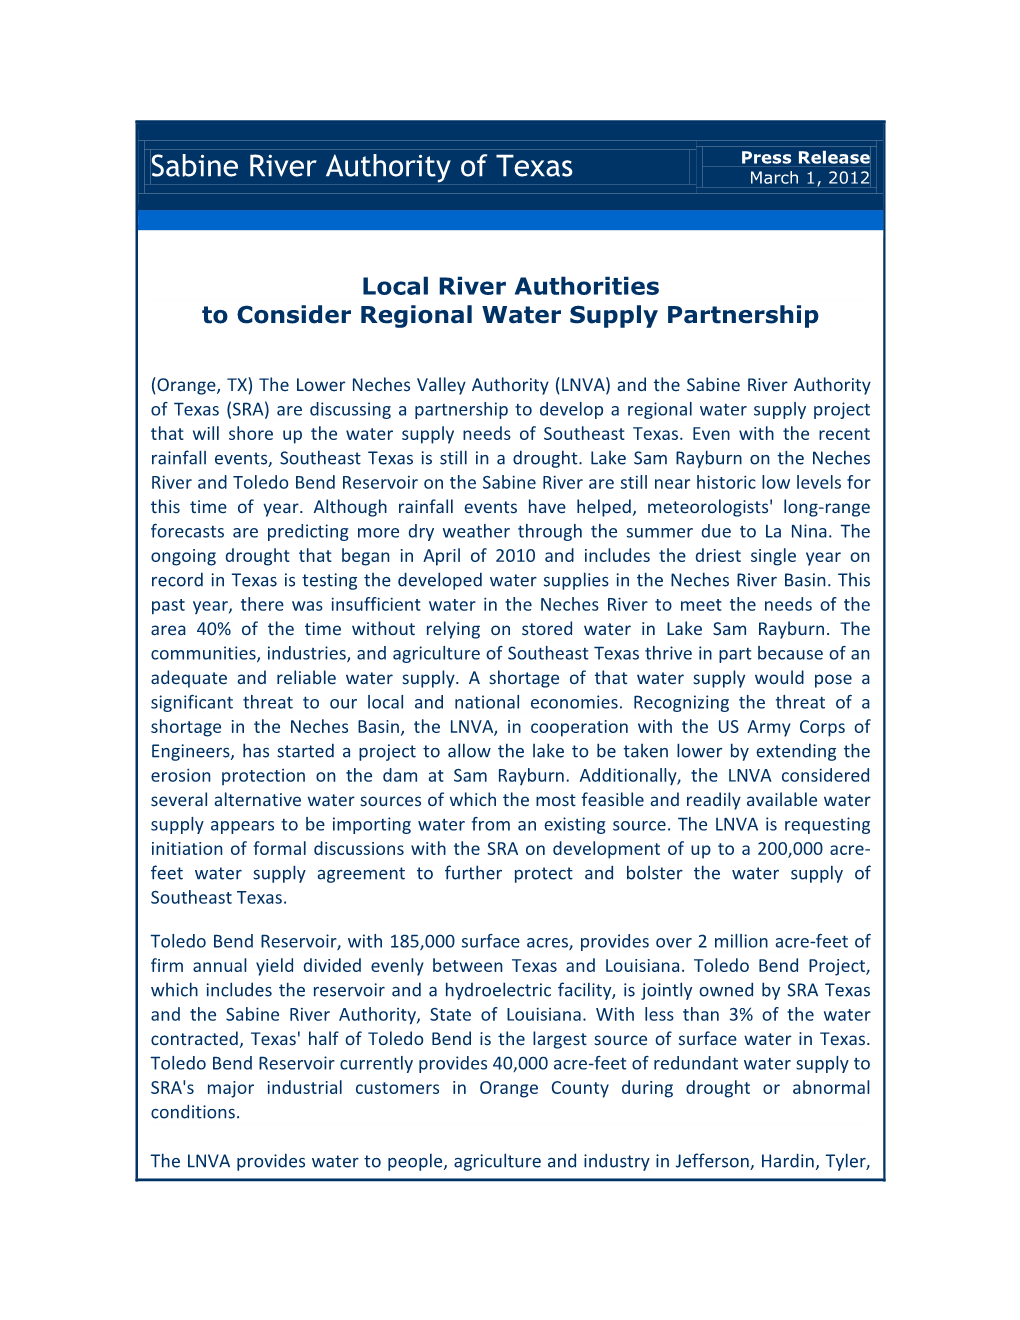 Sabine River Authority of Texas March 1, 2012